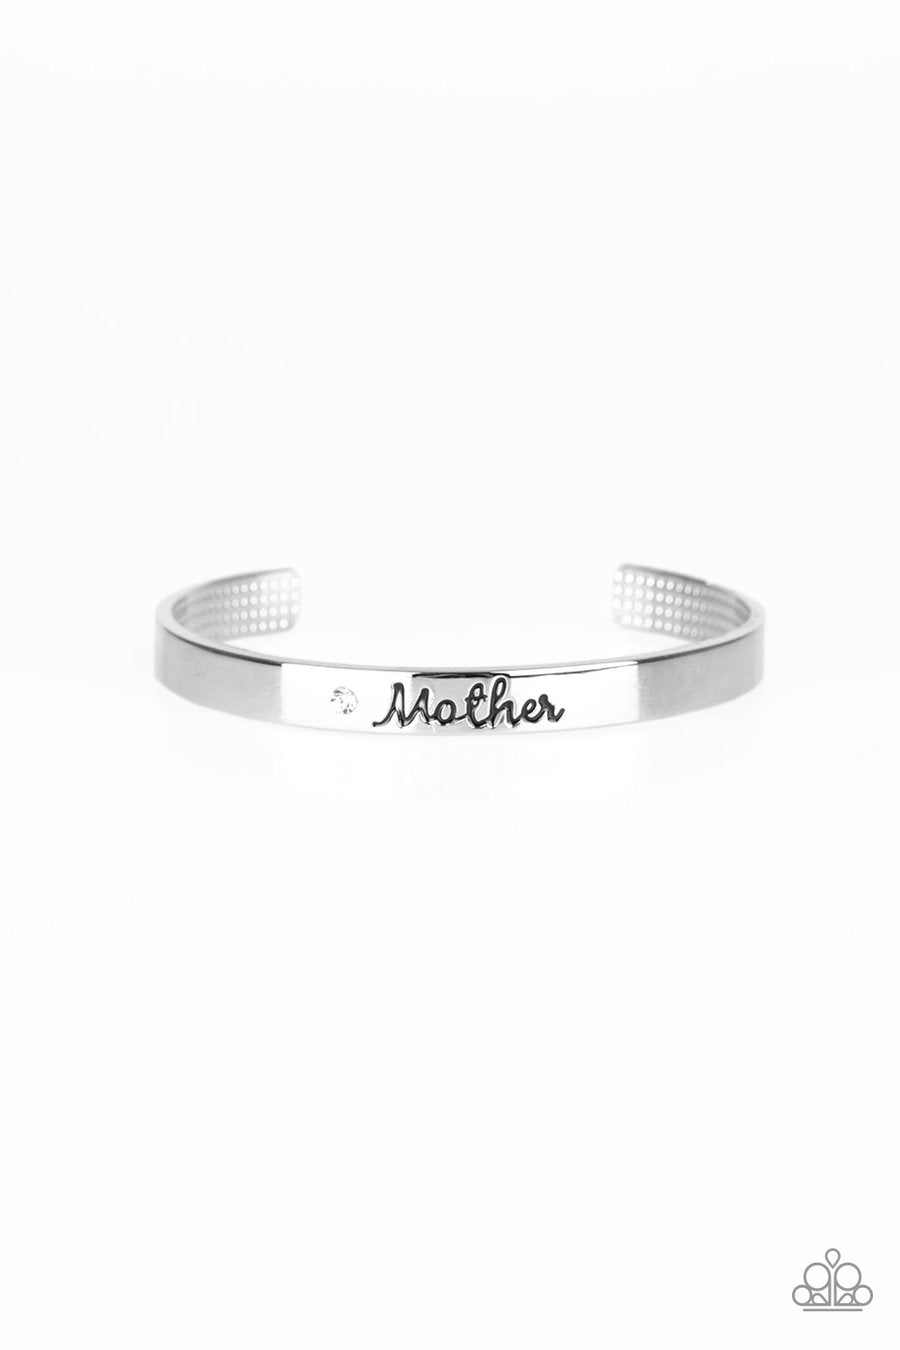 Every Day Is Mother’s Day - Silver Bracelet  - Paparazzi Accessories - Paparazzi Accessories 